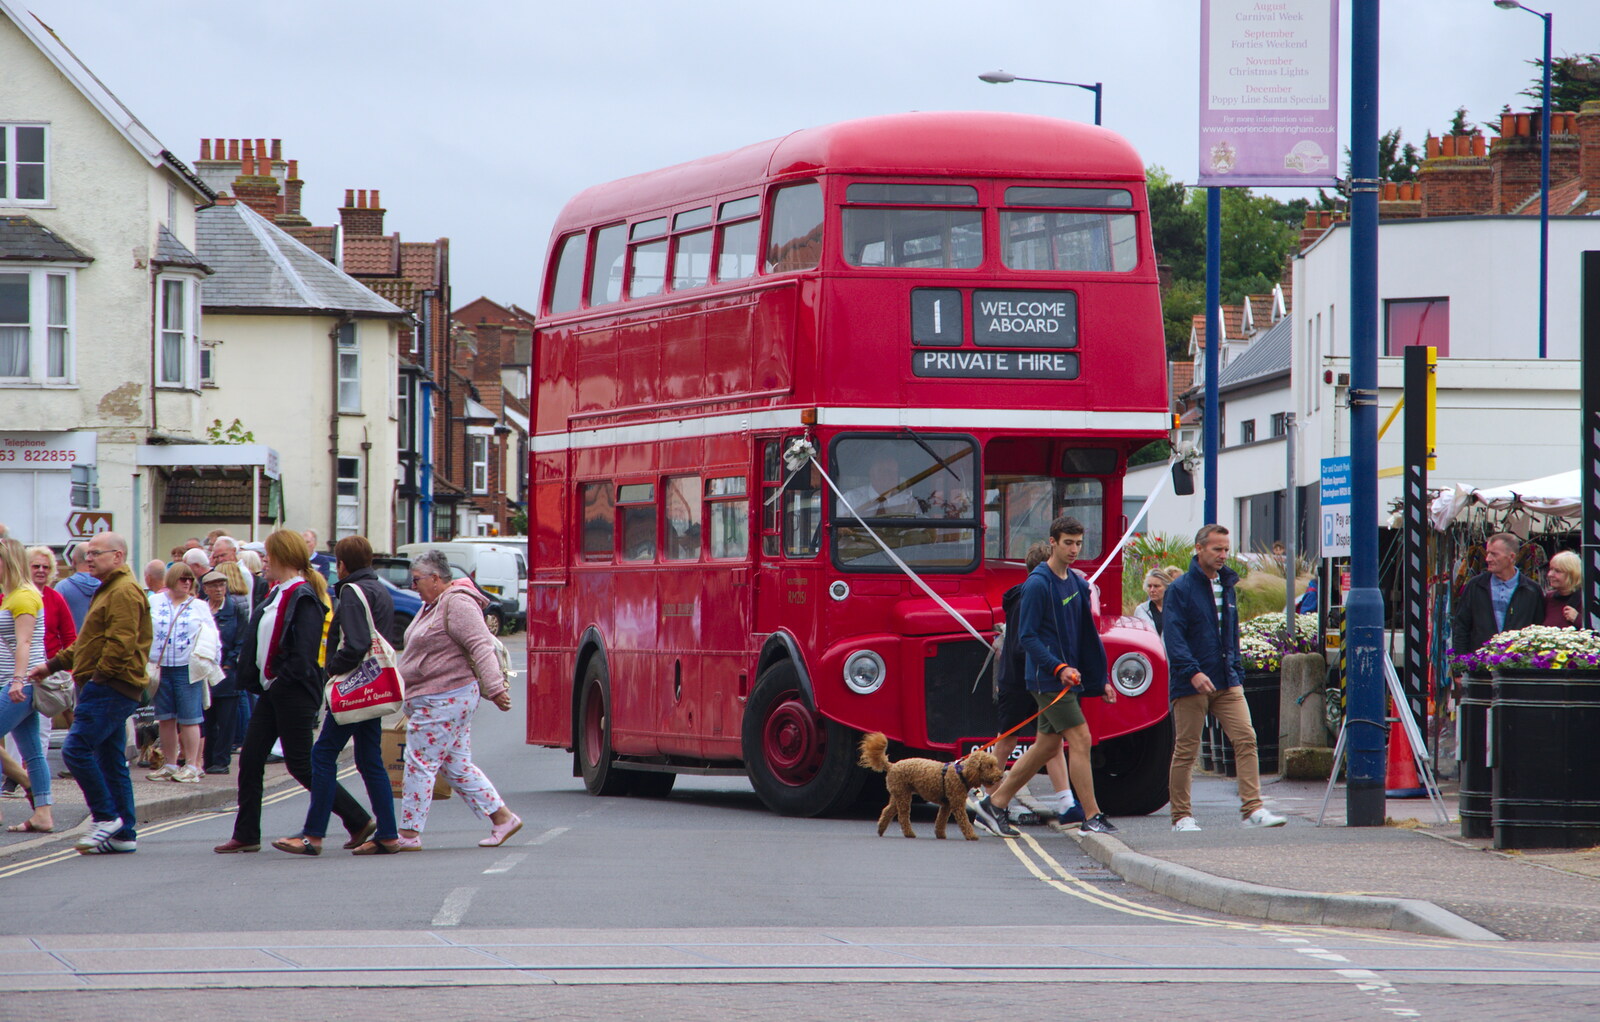 A vintage Routmaster bus in wedding ribbons from Kelling Camping and the Potty Morris Festival, Sheringham, North Norfolk - 6th July 2019